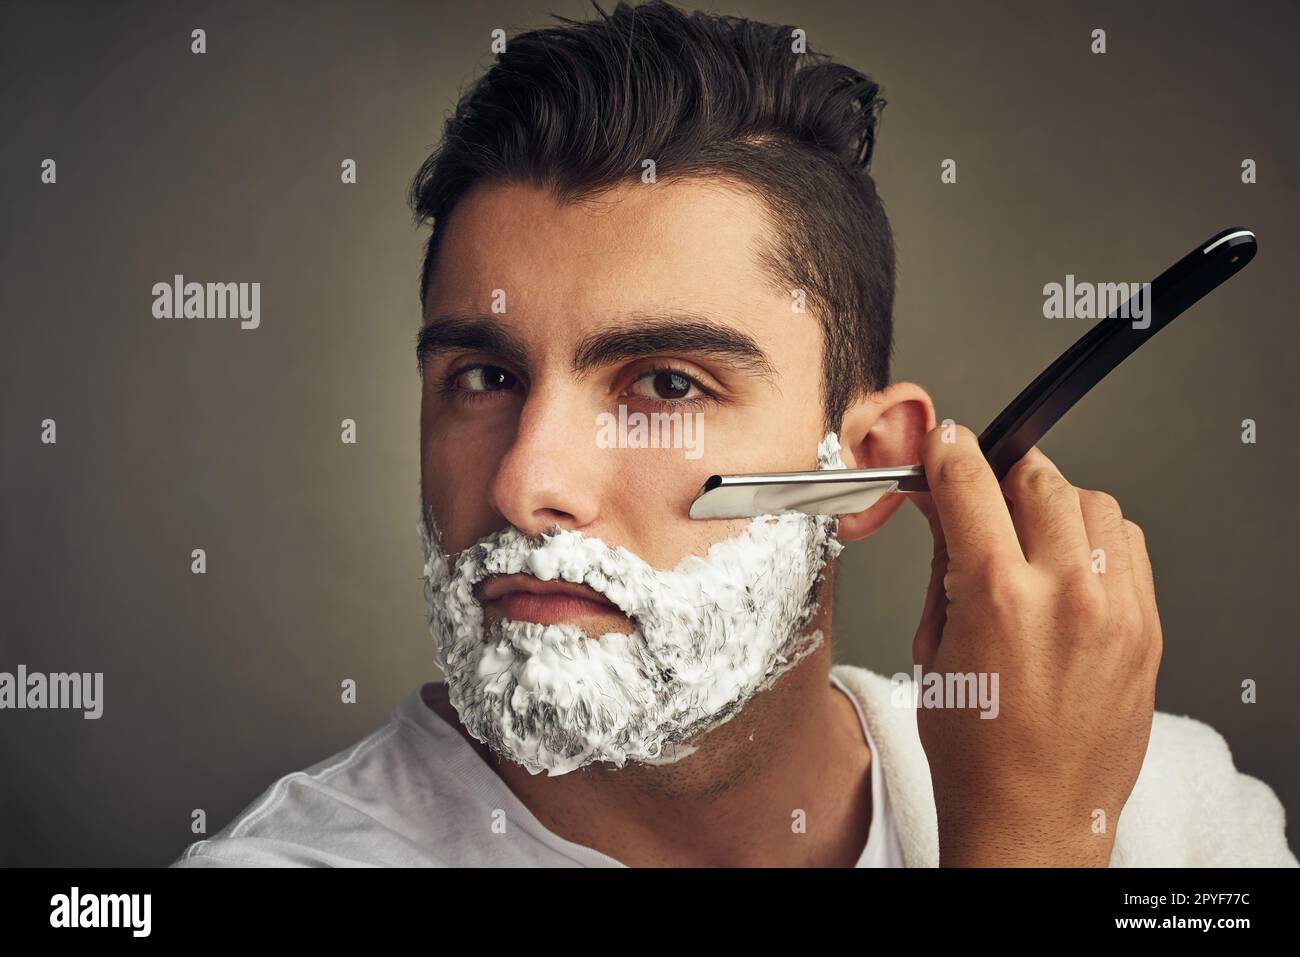 Make sure that its neat and trimmed. a handsome young man shaving with a straight razor. Stock Photo